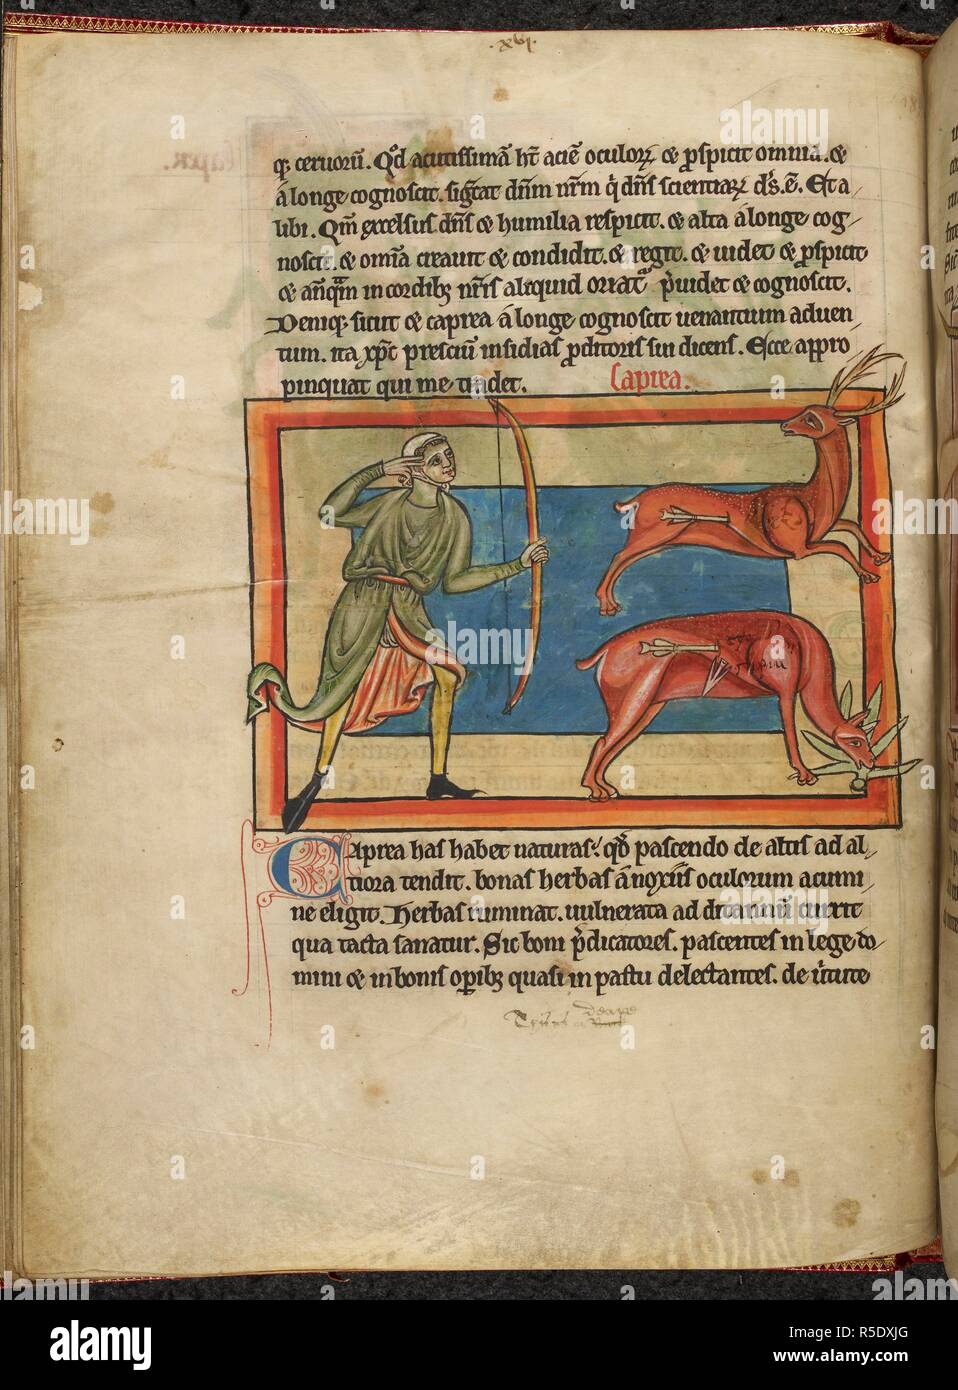 A man shooting arrows at wild goats, one of which is eating foliage. A hunting scene. . Bestiary, with extracts from Giraldus Cambrensis on Irish birds. England, S. (Salisbury?). Bestiary, with extracts from Giraldus Cambrensis on Irish birds. 2nd quarter of the 13th century. Source: Harley 4751 f.14v. Language: Latin. Stock Photo